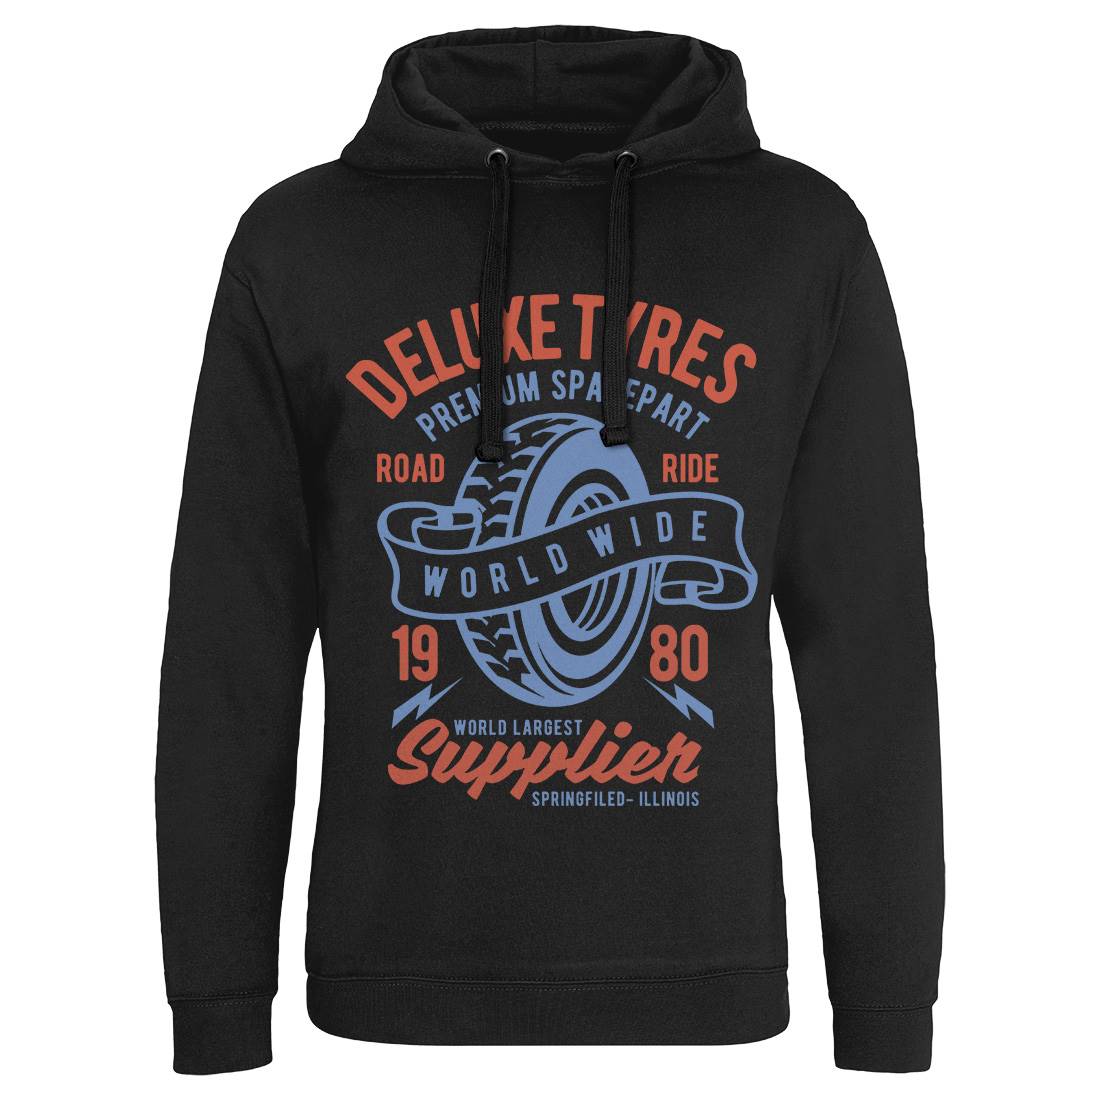 Deluxe Tyres Mens Hoodie Without Pocket Cars B204